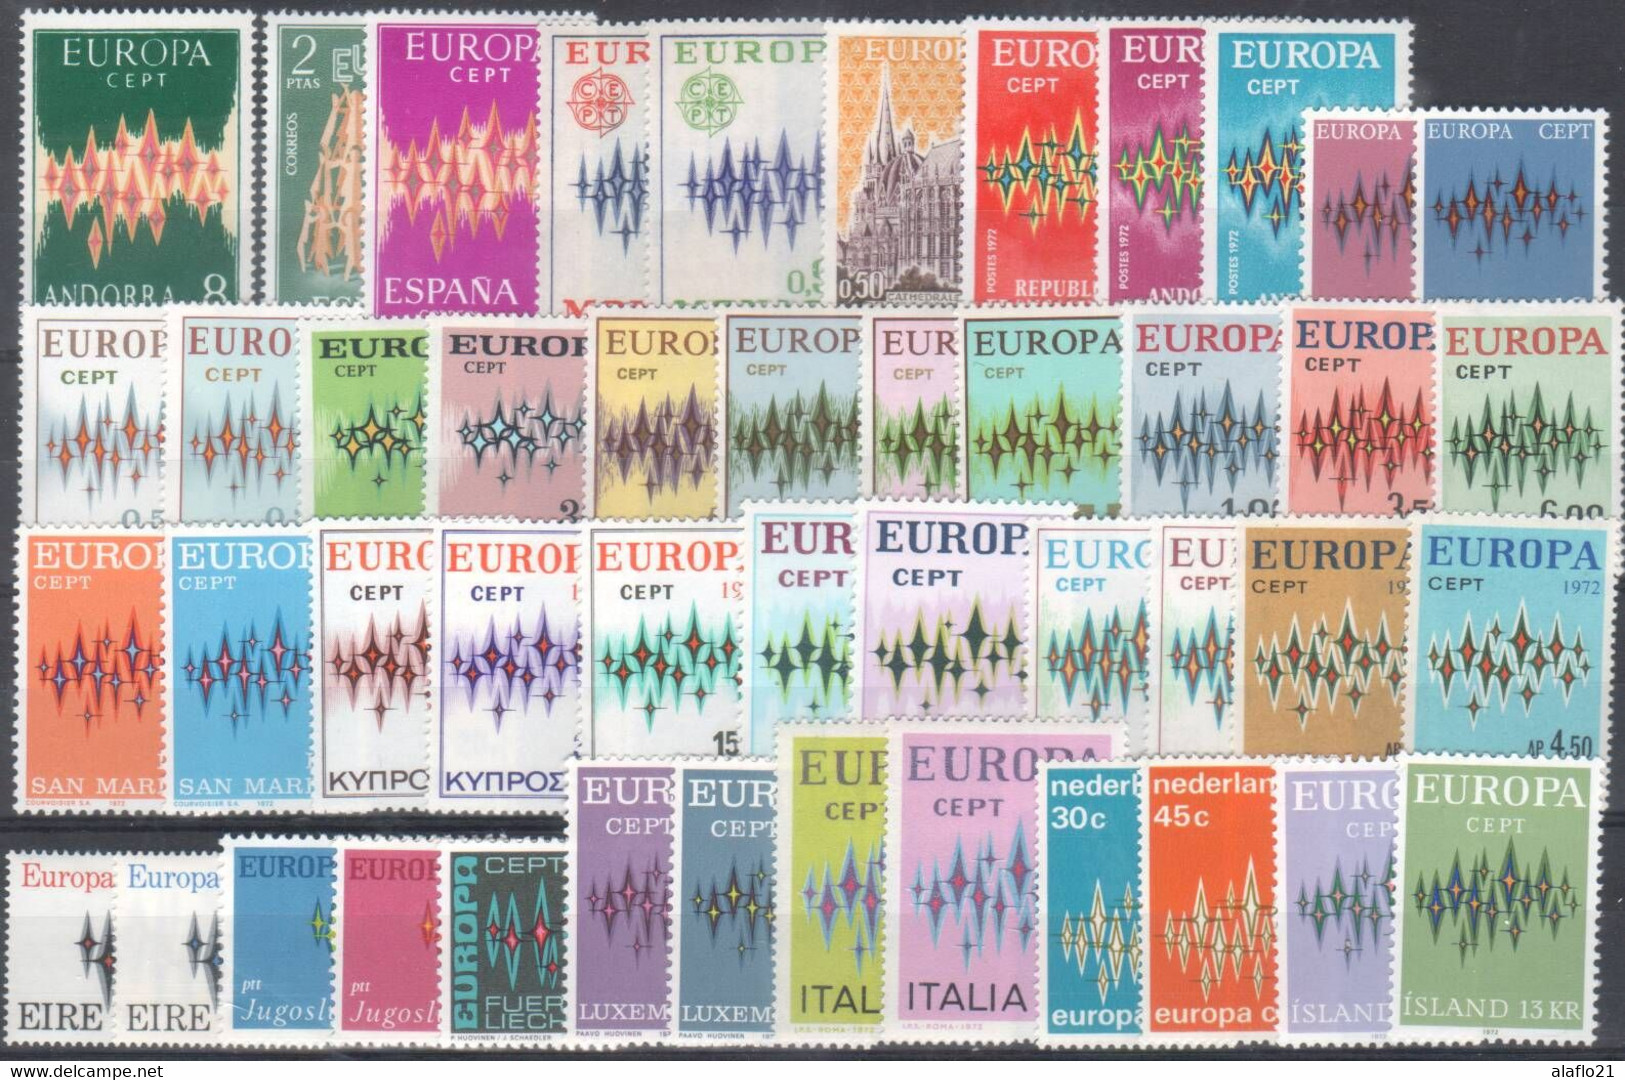 EUROPA - ANNEE 1972 COMPLETE - TIMBRES NEUFS SANS CHARNIERE - FORTE COTE - 1972